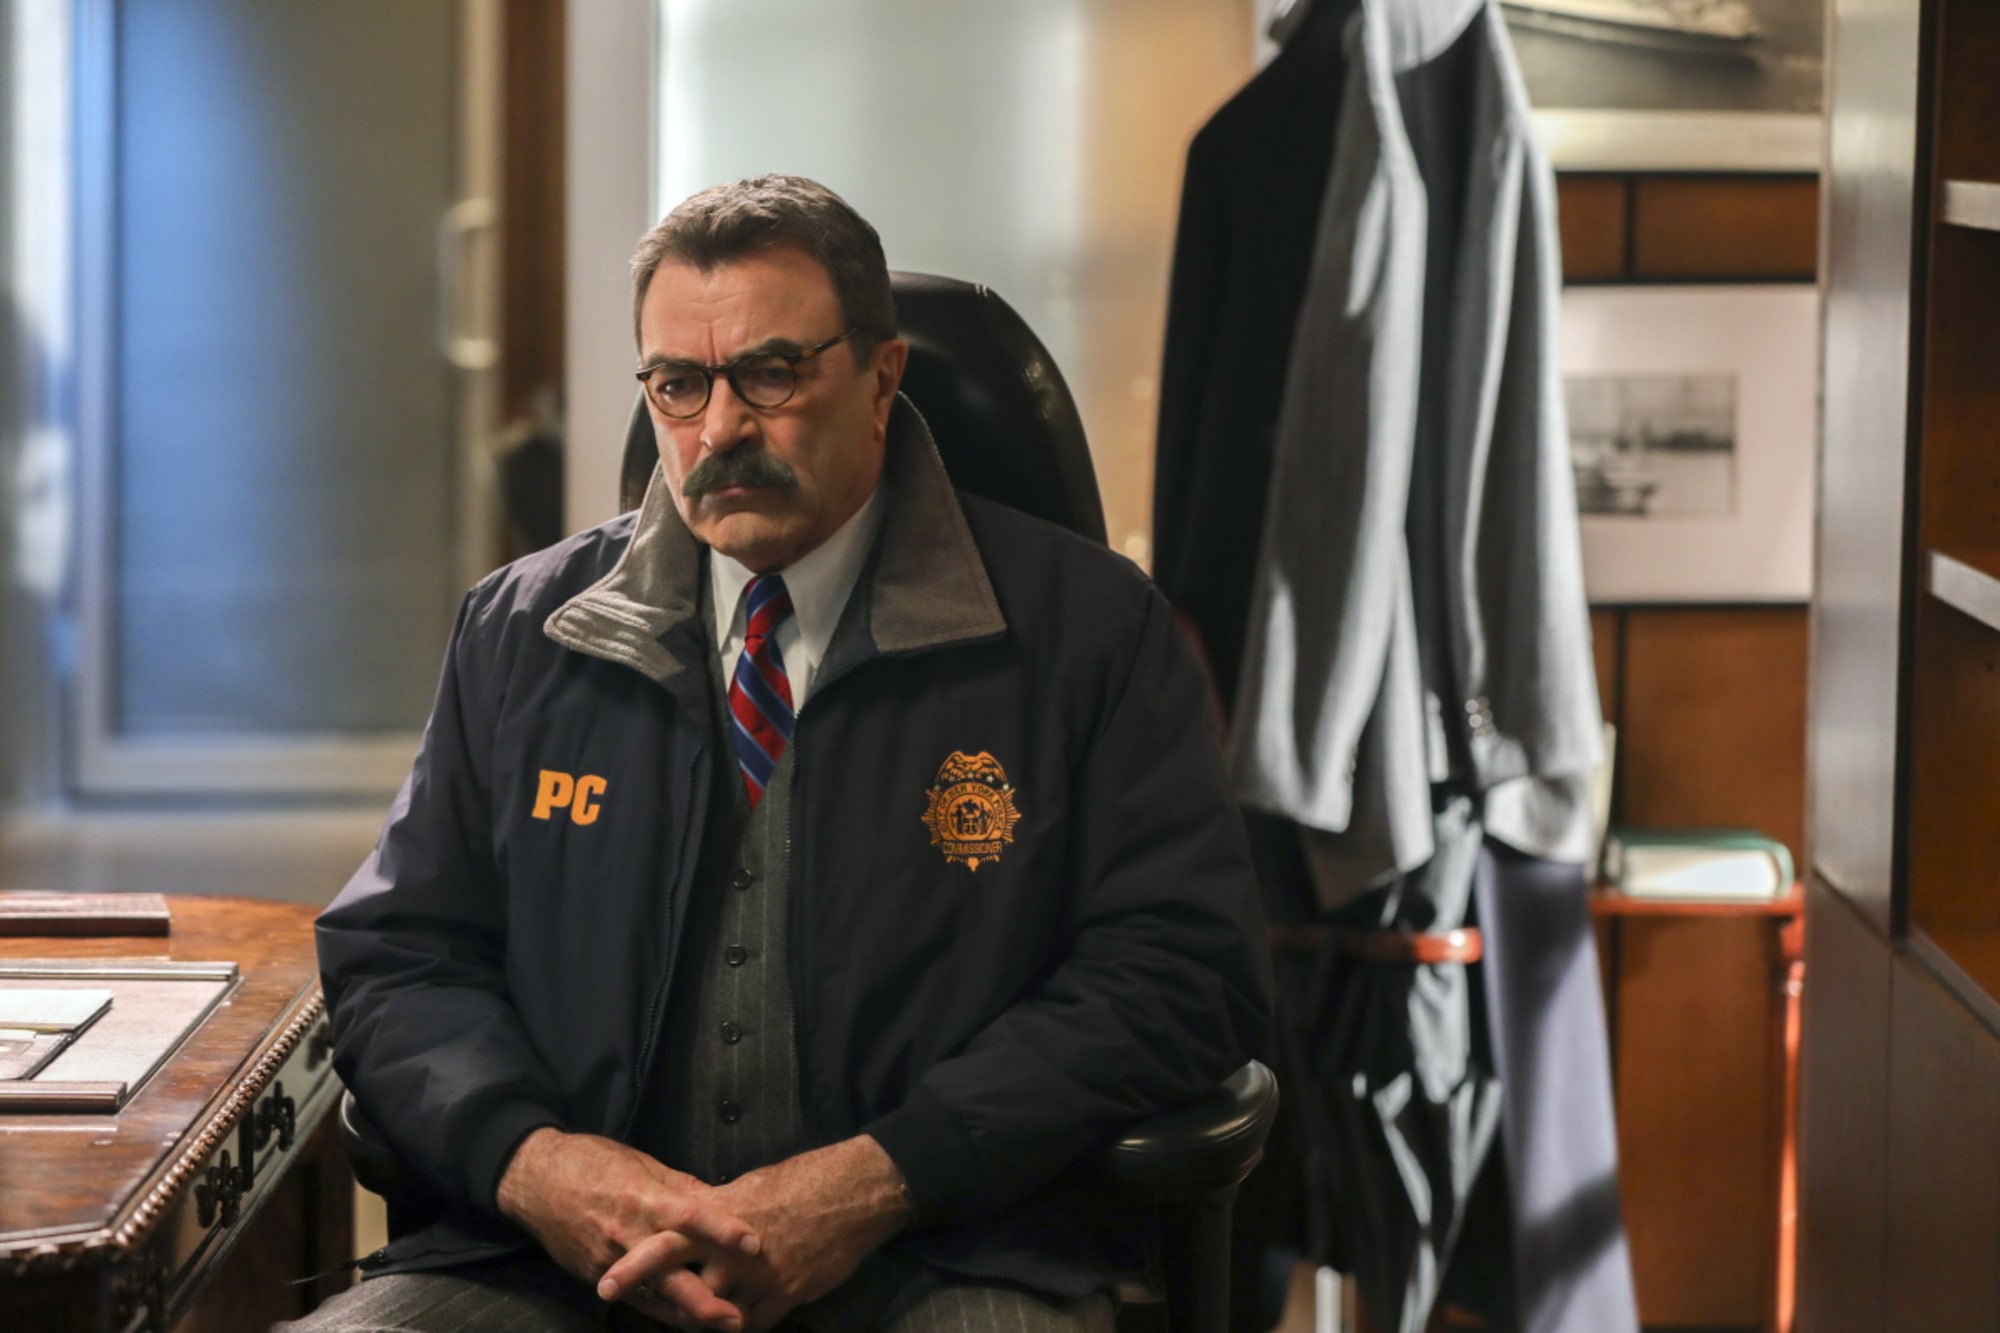 Blue Bloods Season 12 premiere date, cast, trailer, synopsis, and more